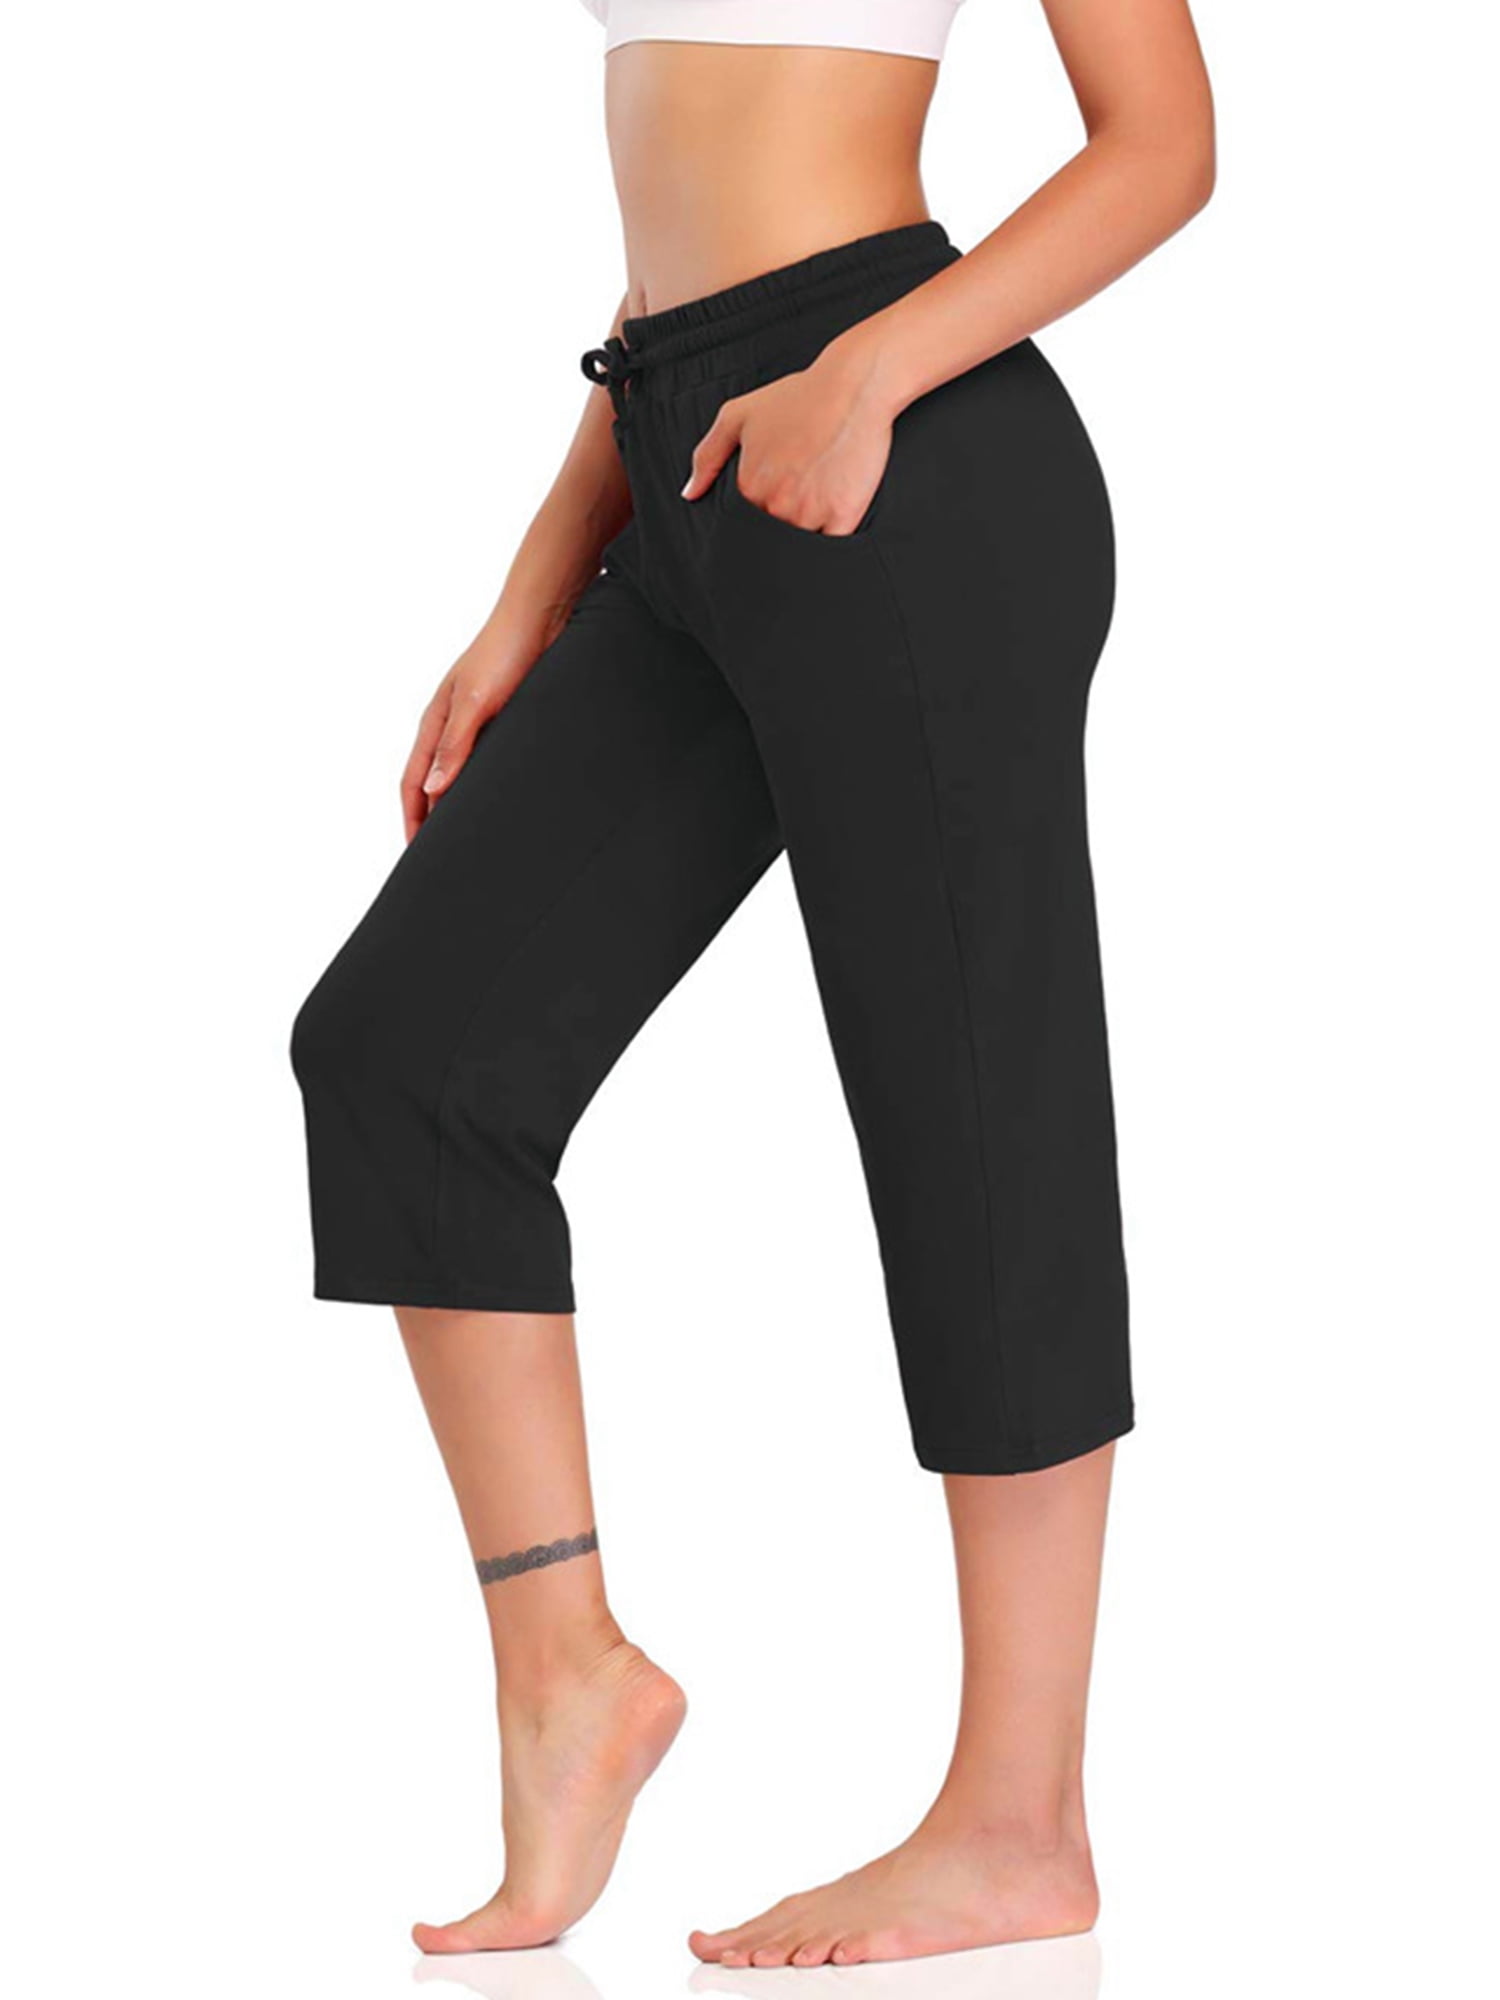 Details about   Womens 3/4 Capri Yoga Pants Pocket Gym Leggings Fitness Sports Cropped Trousers 